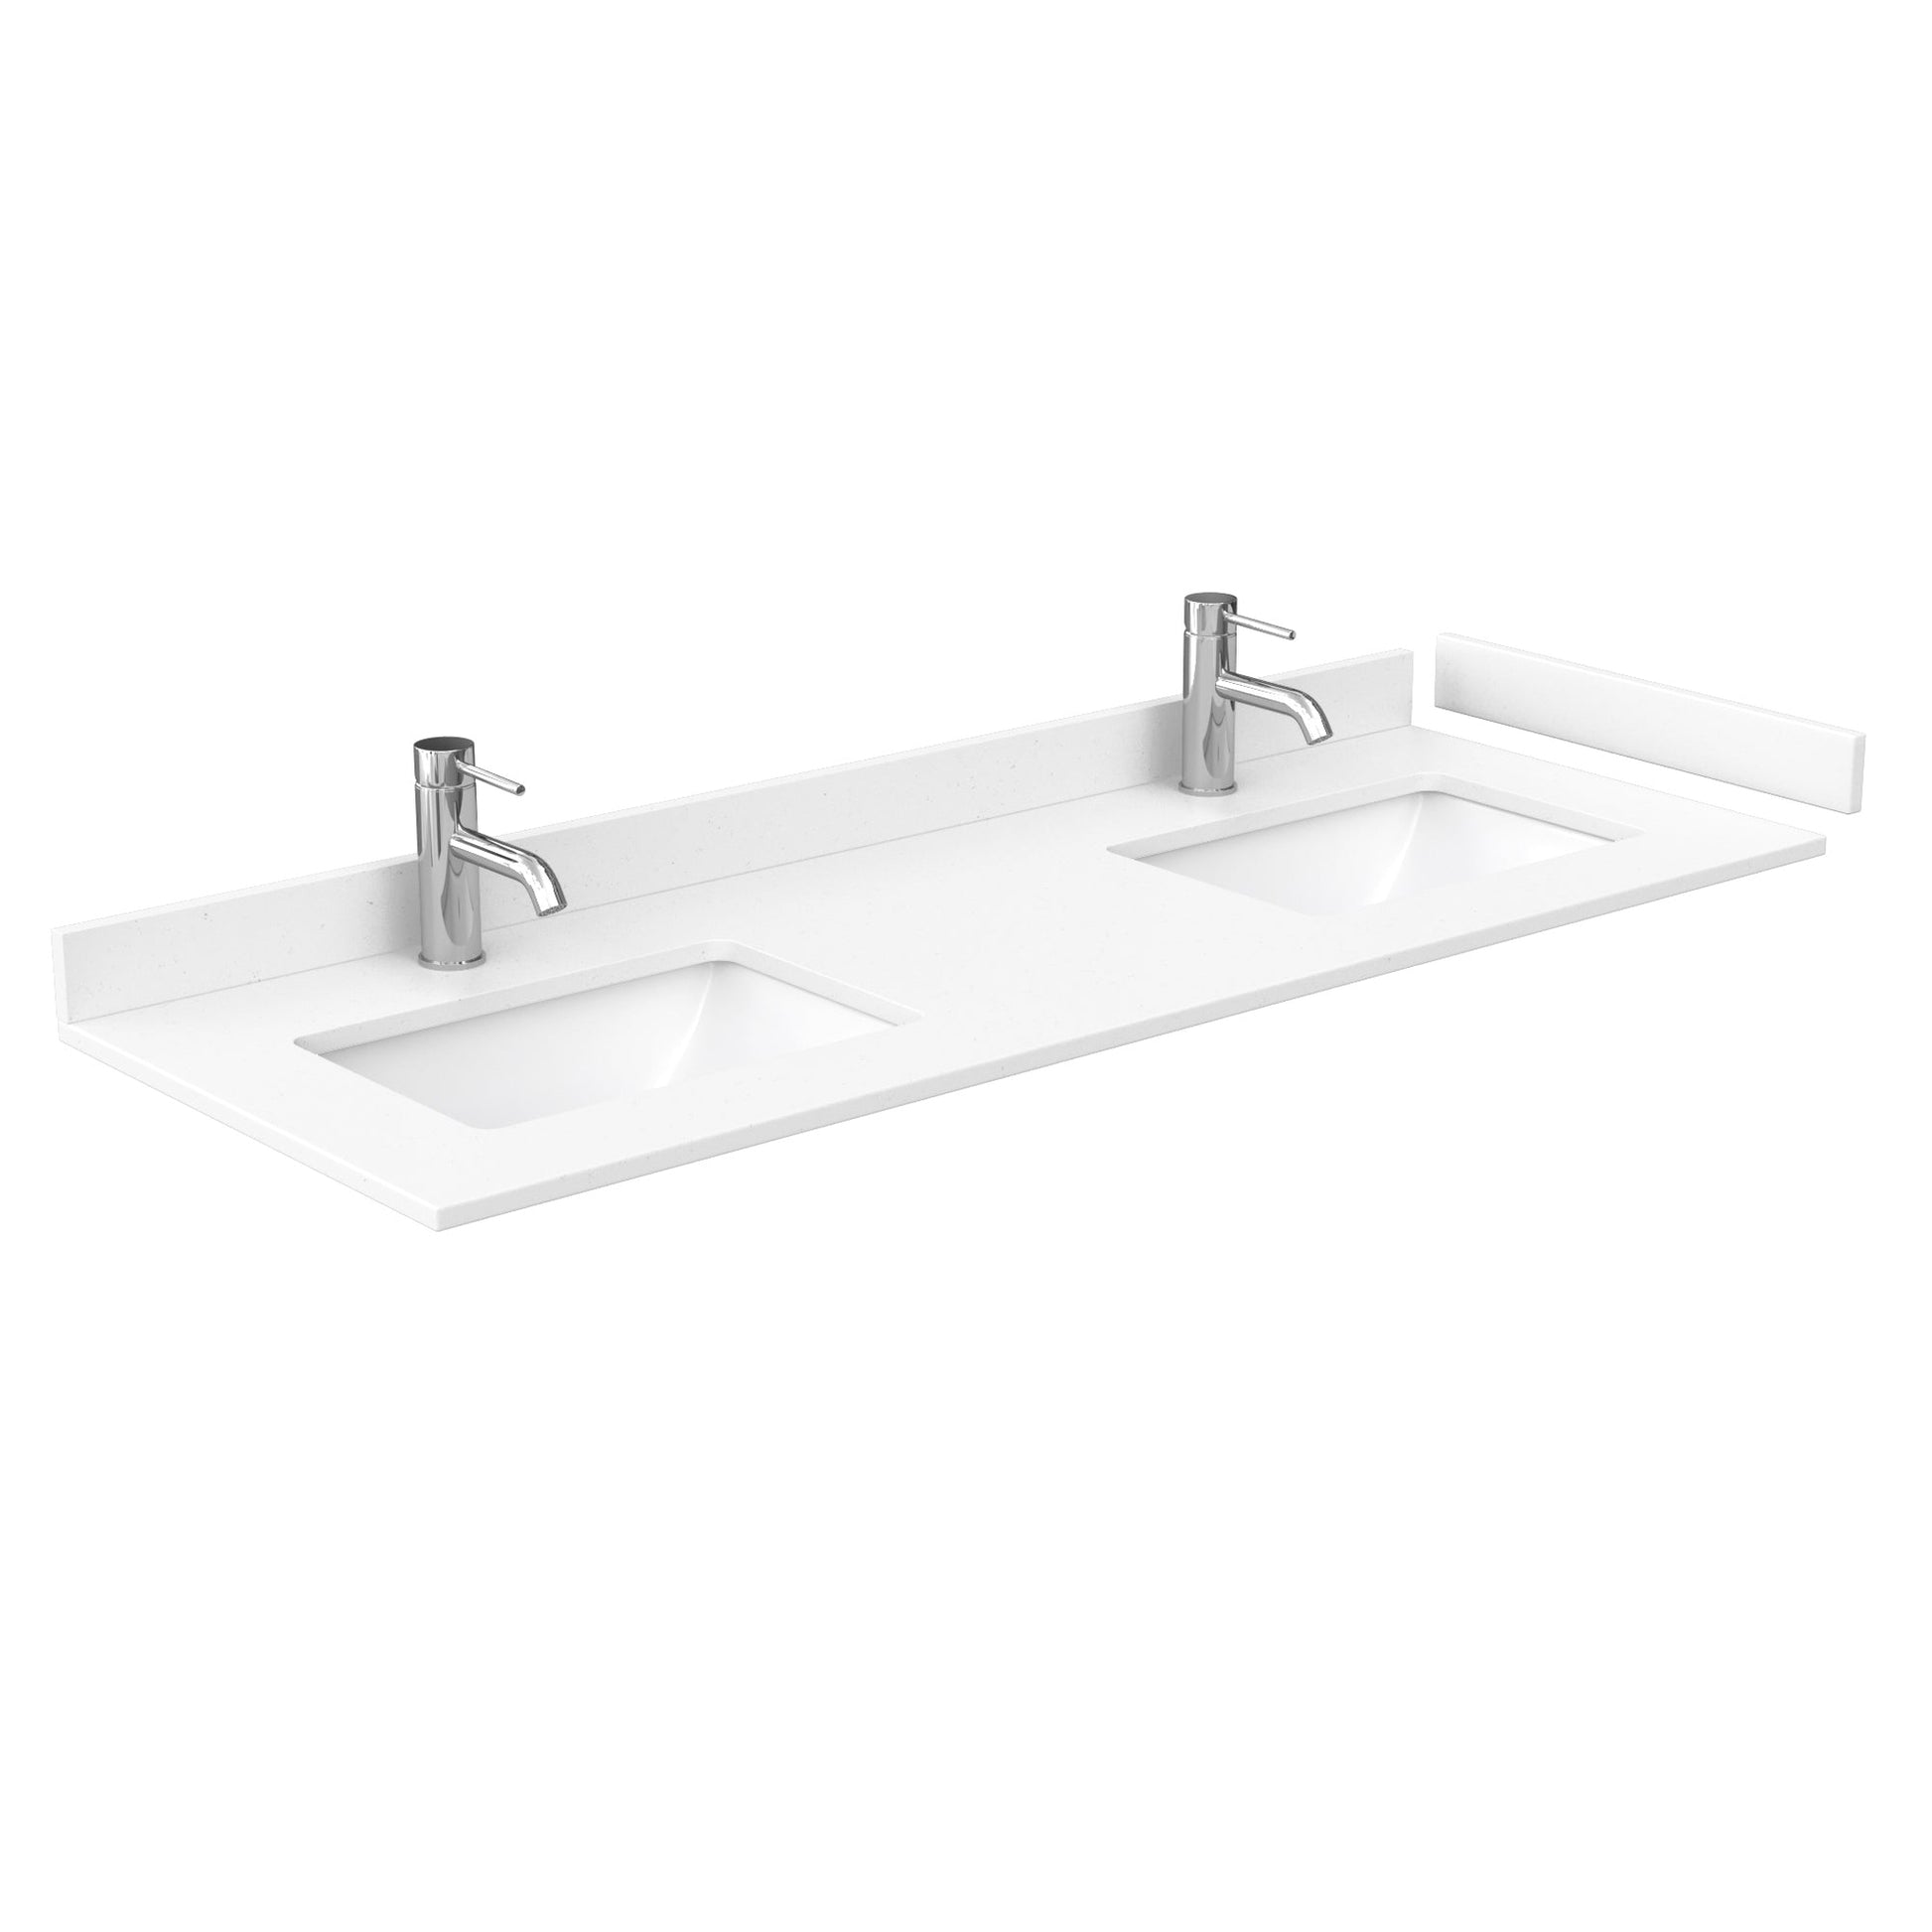 Wyndham Collection Sheffield 60" Double Bathroom Vanity in White, White Cultured Marble Countertop, Undermount Square Sinks, No Mirror